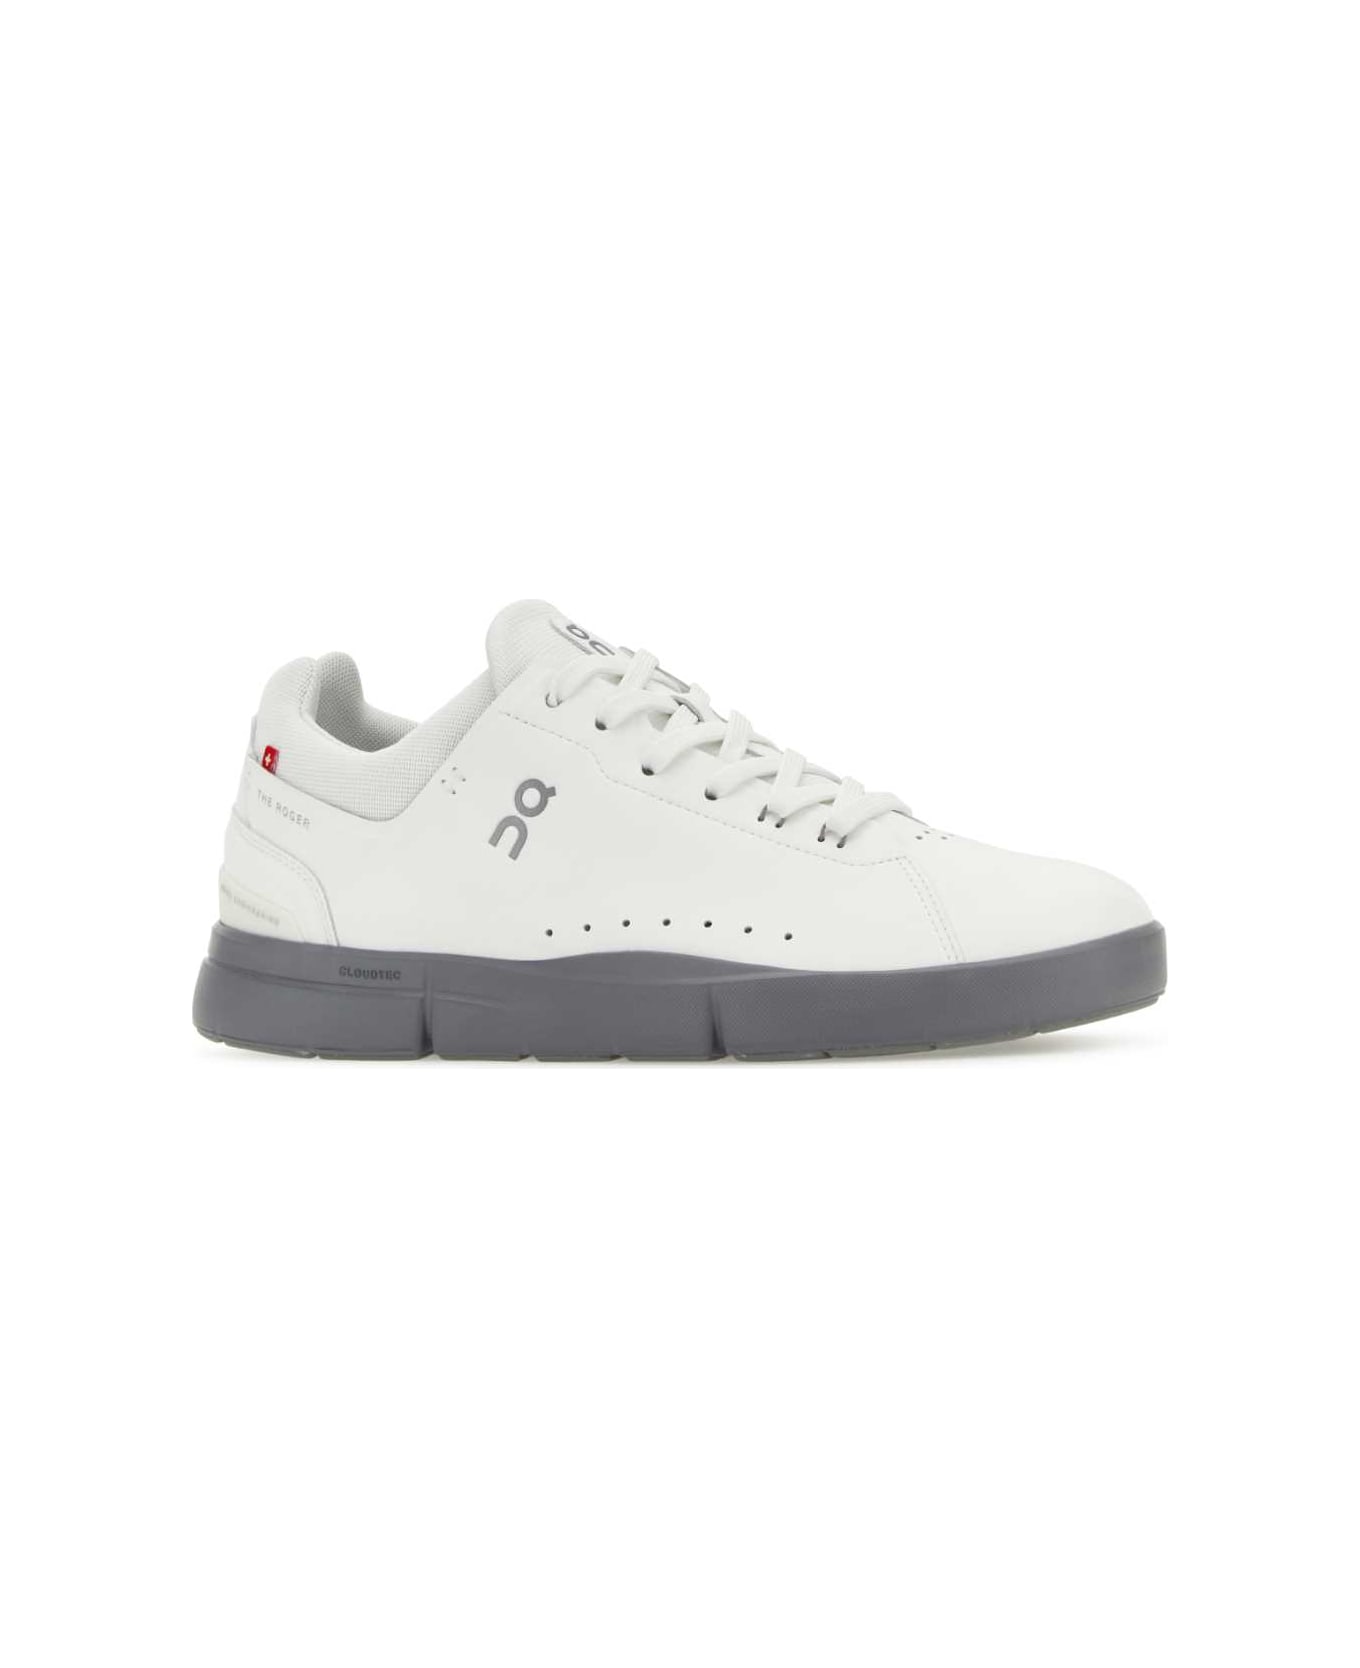 ON White Synthetic Leather And Mesh The Roger Advantage Sneakers - WHITEALLOY